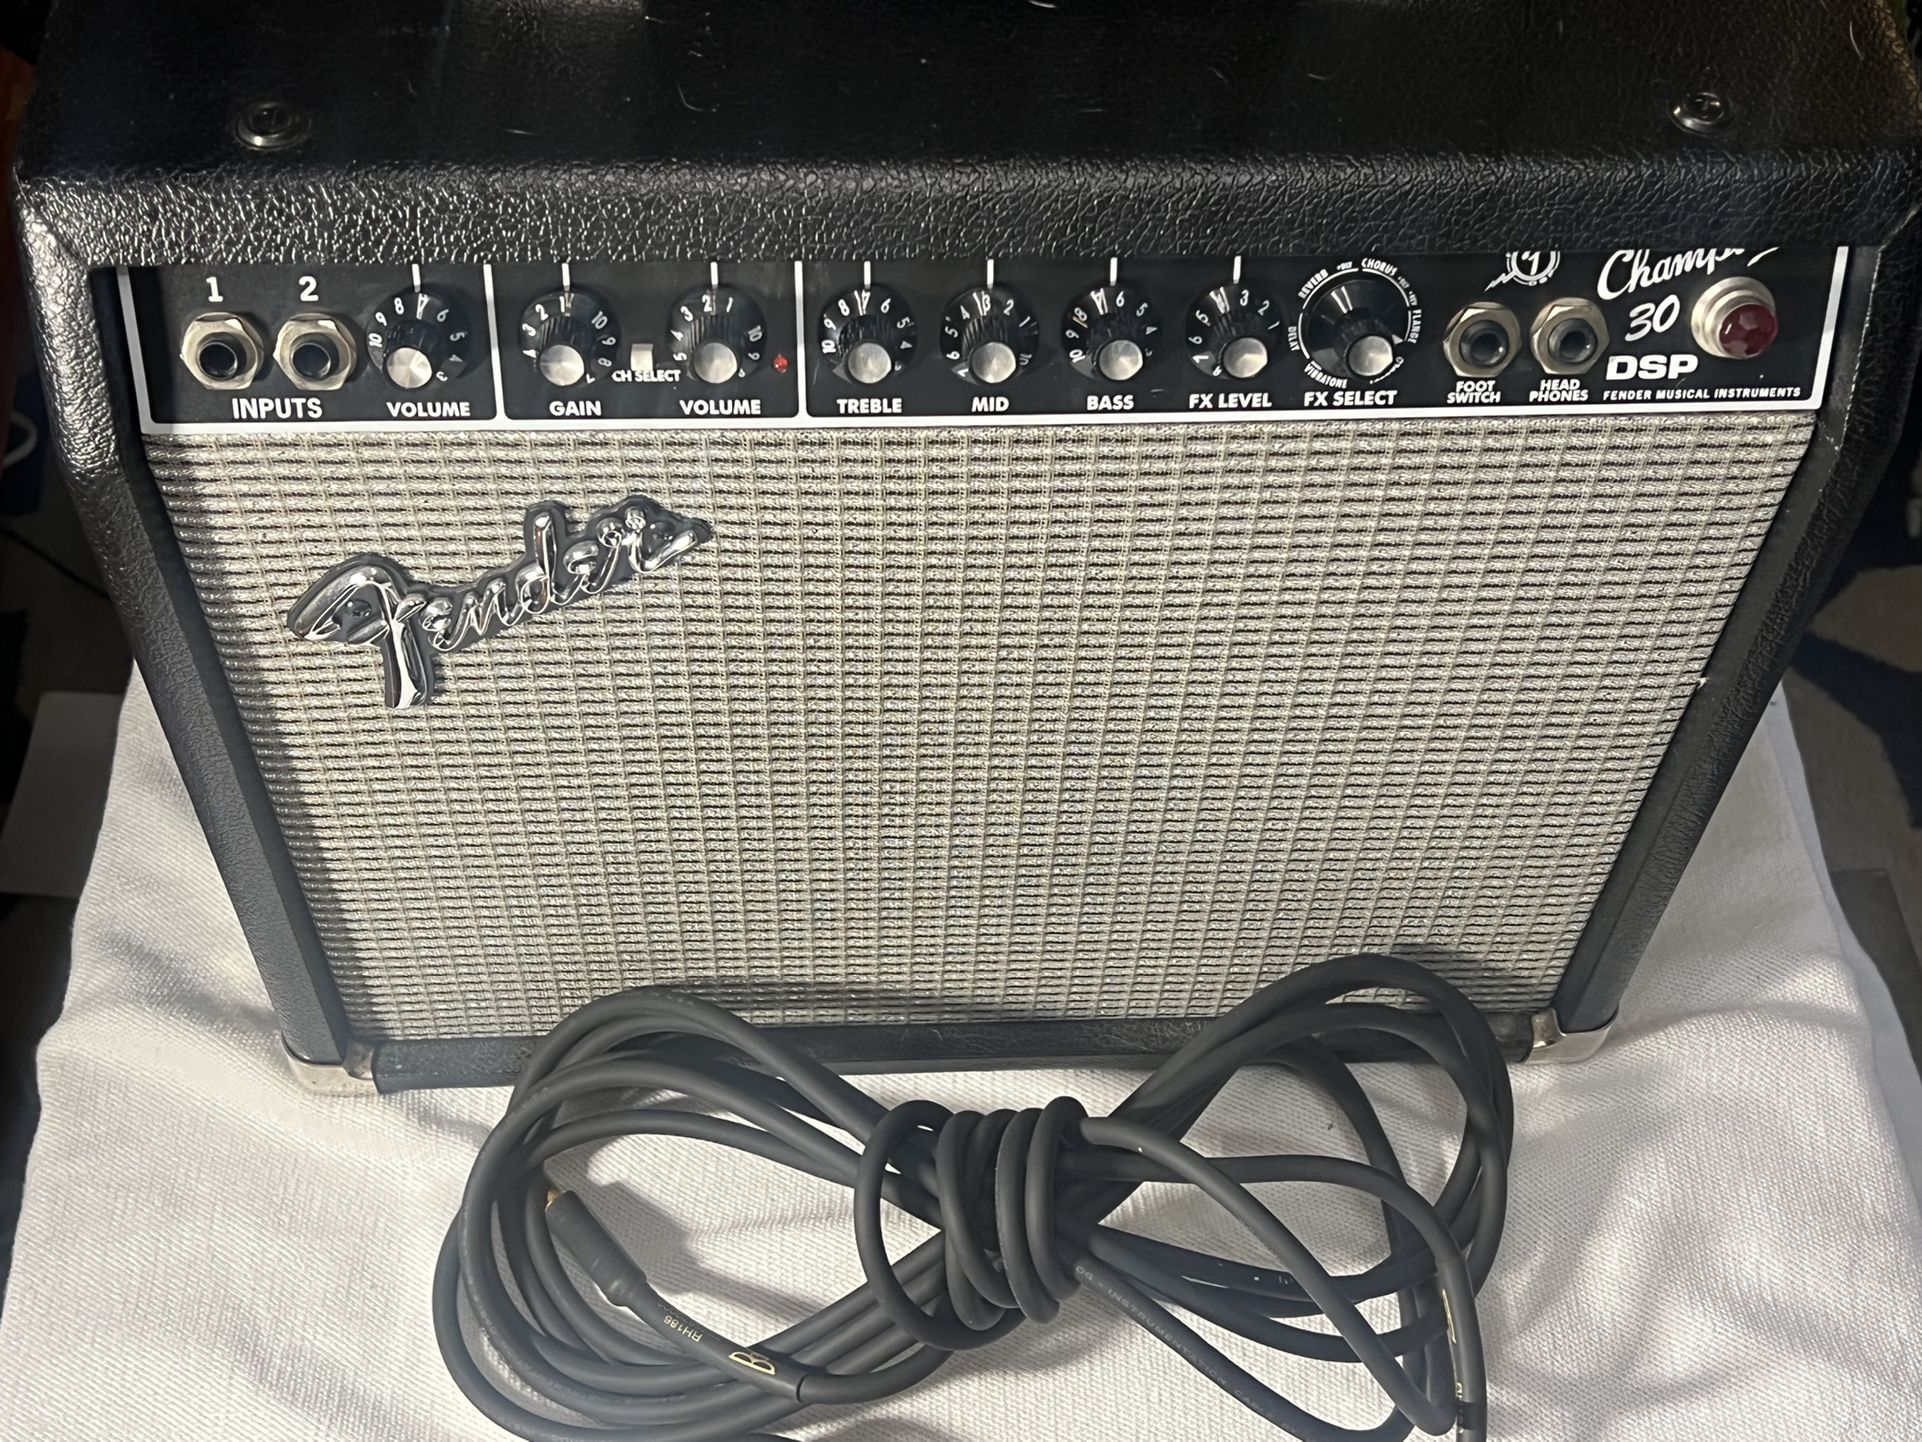 Fender Champion 30 DSP Practice Amp with 2 Cables - Like New